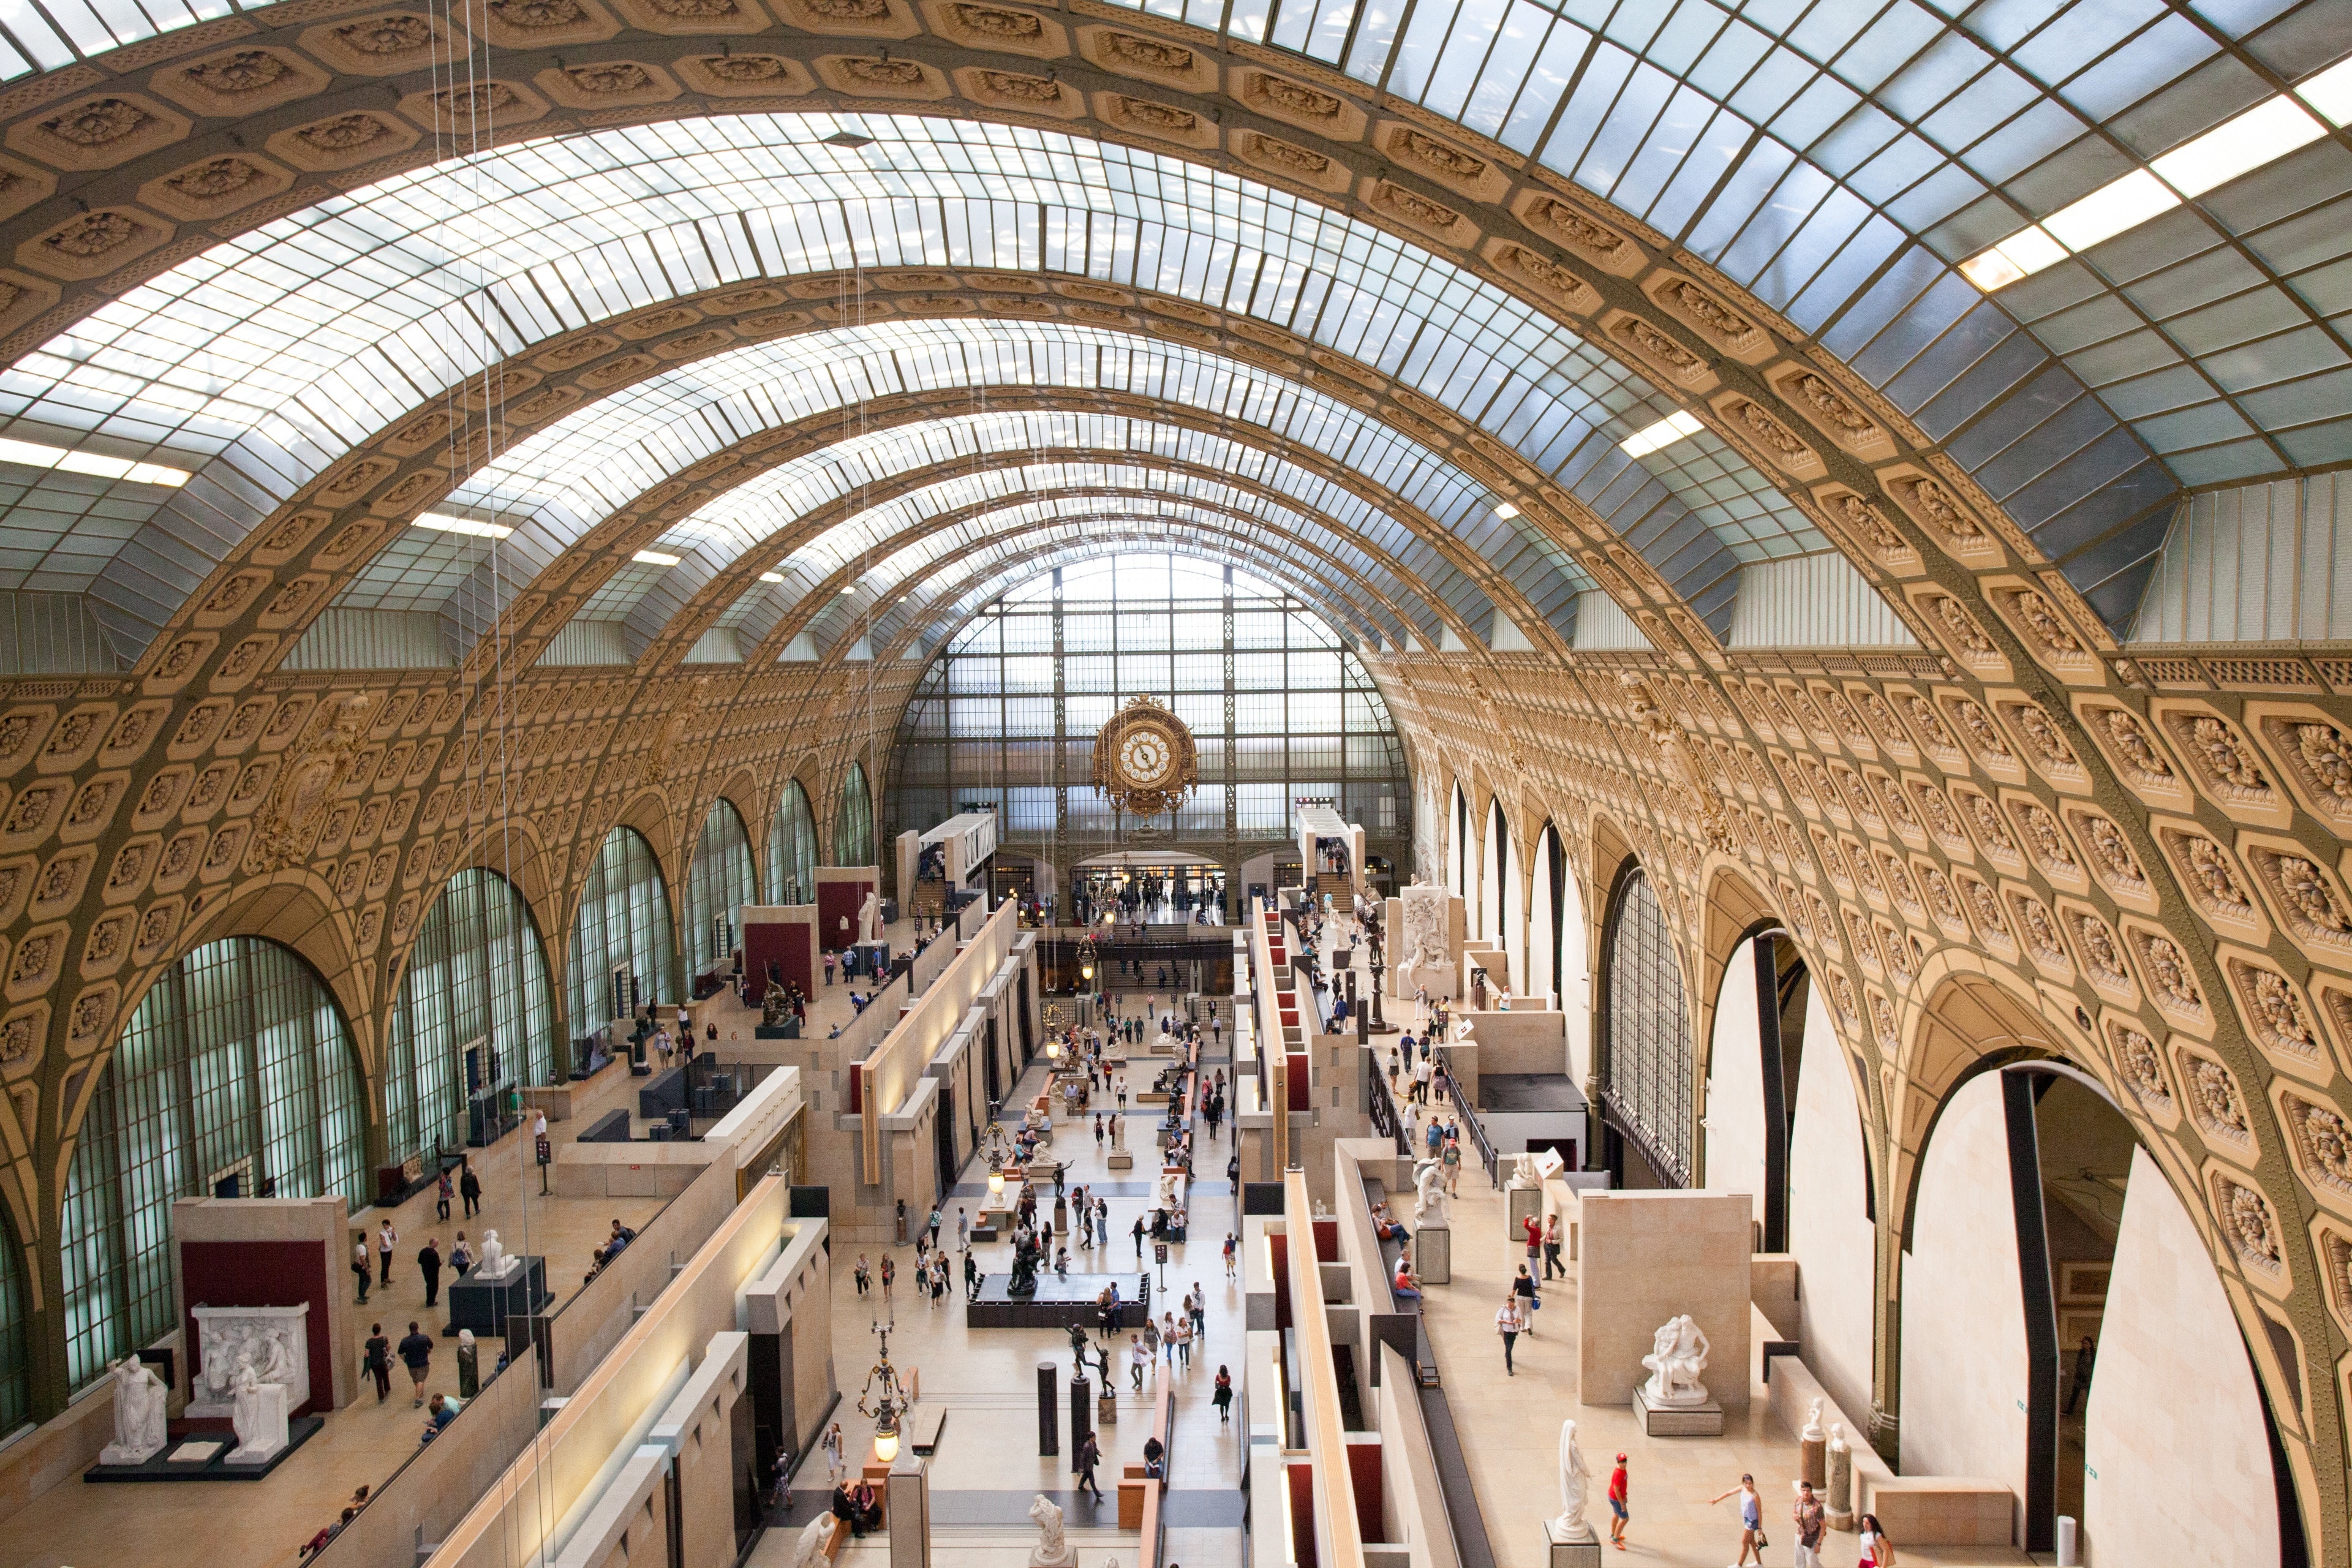 Visitors Guide to Orsay Museum (Musée d'Orsay) - Paris Discovery Guide